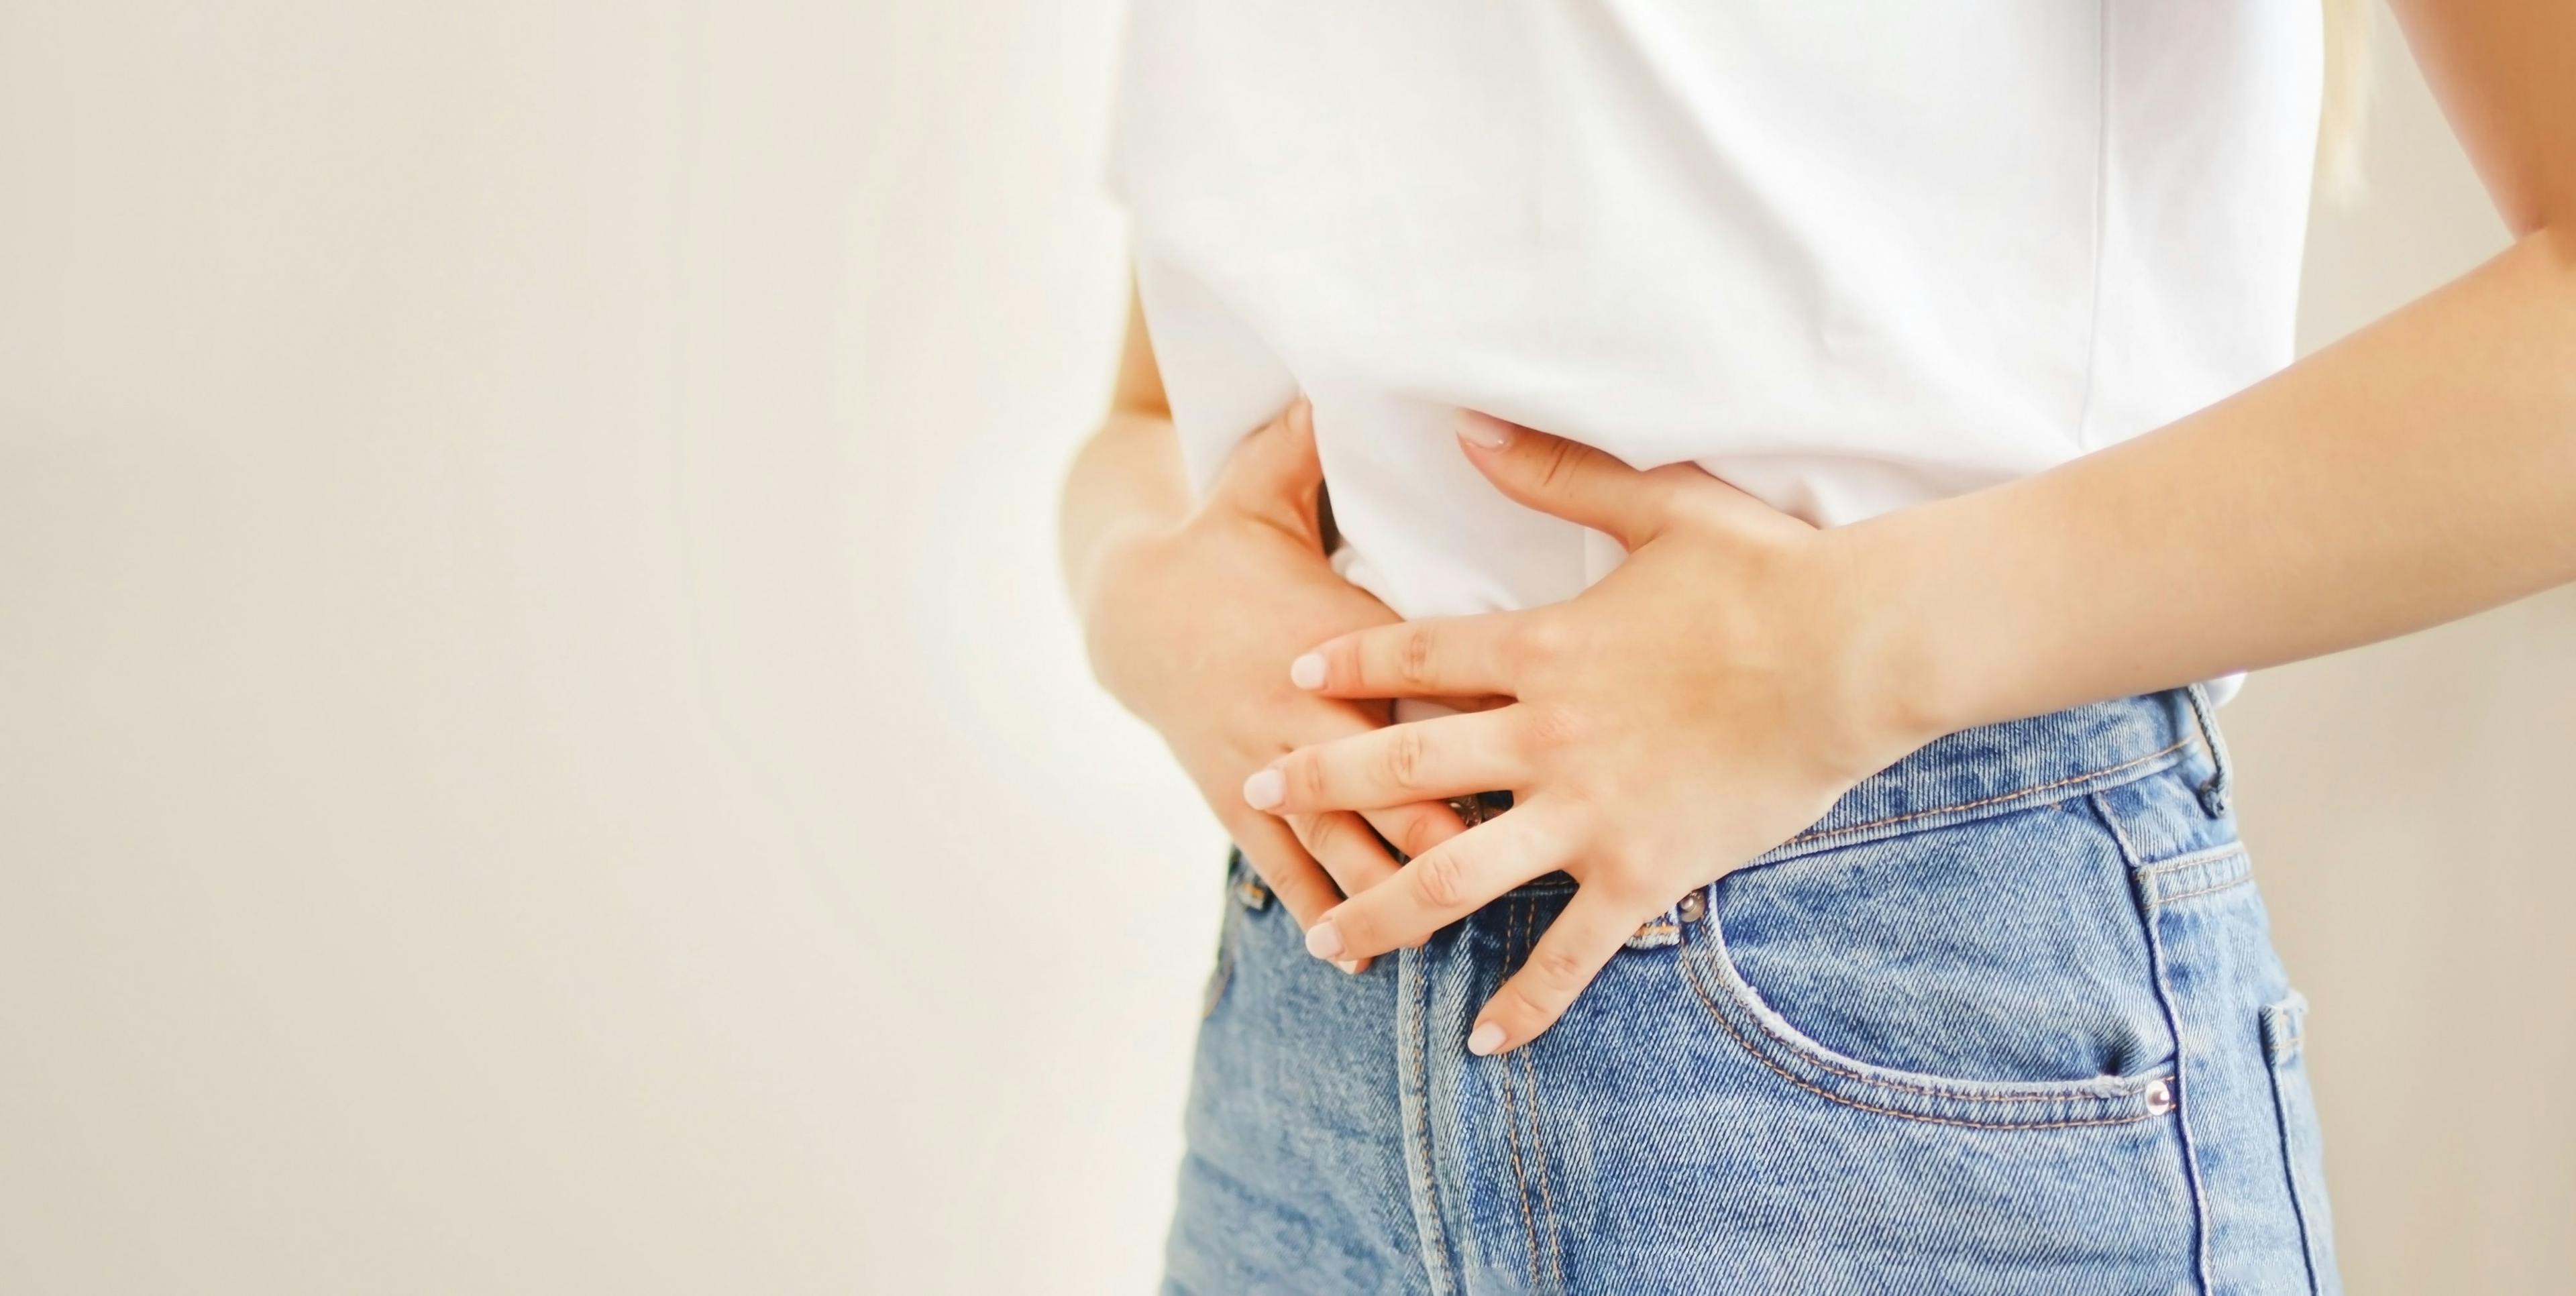 Woman suffering from stomach ache. Holding belly and feeling abdominal menstrual pain or bowel and digestion problems | Image credit: © AliceCam - © stock.adobe.com